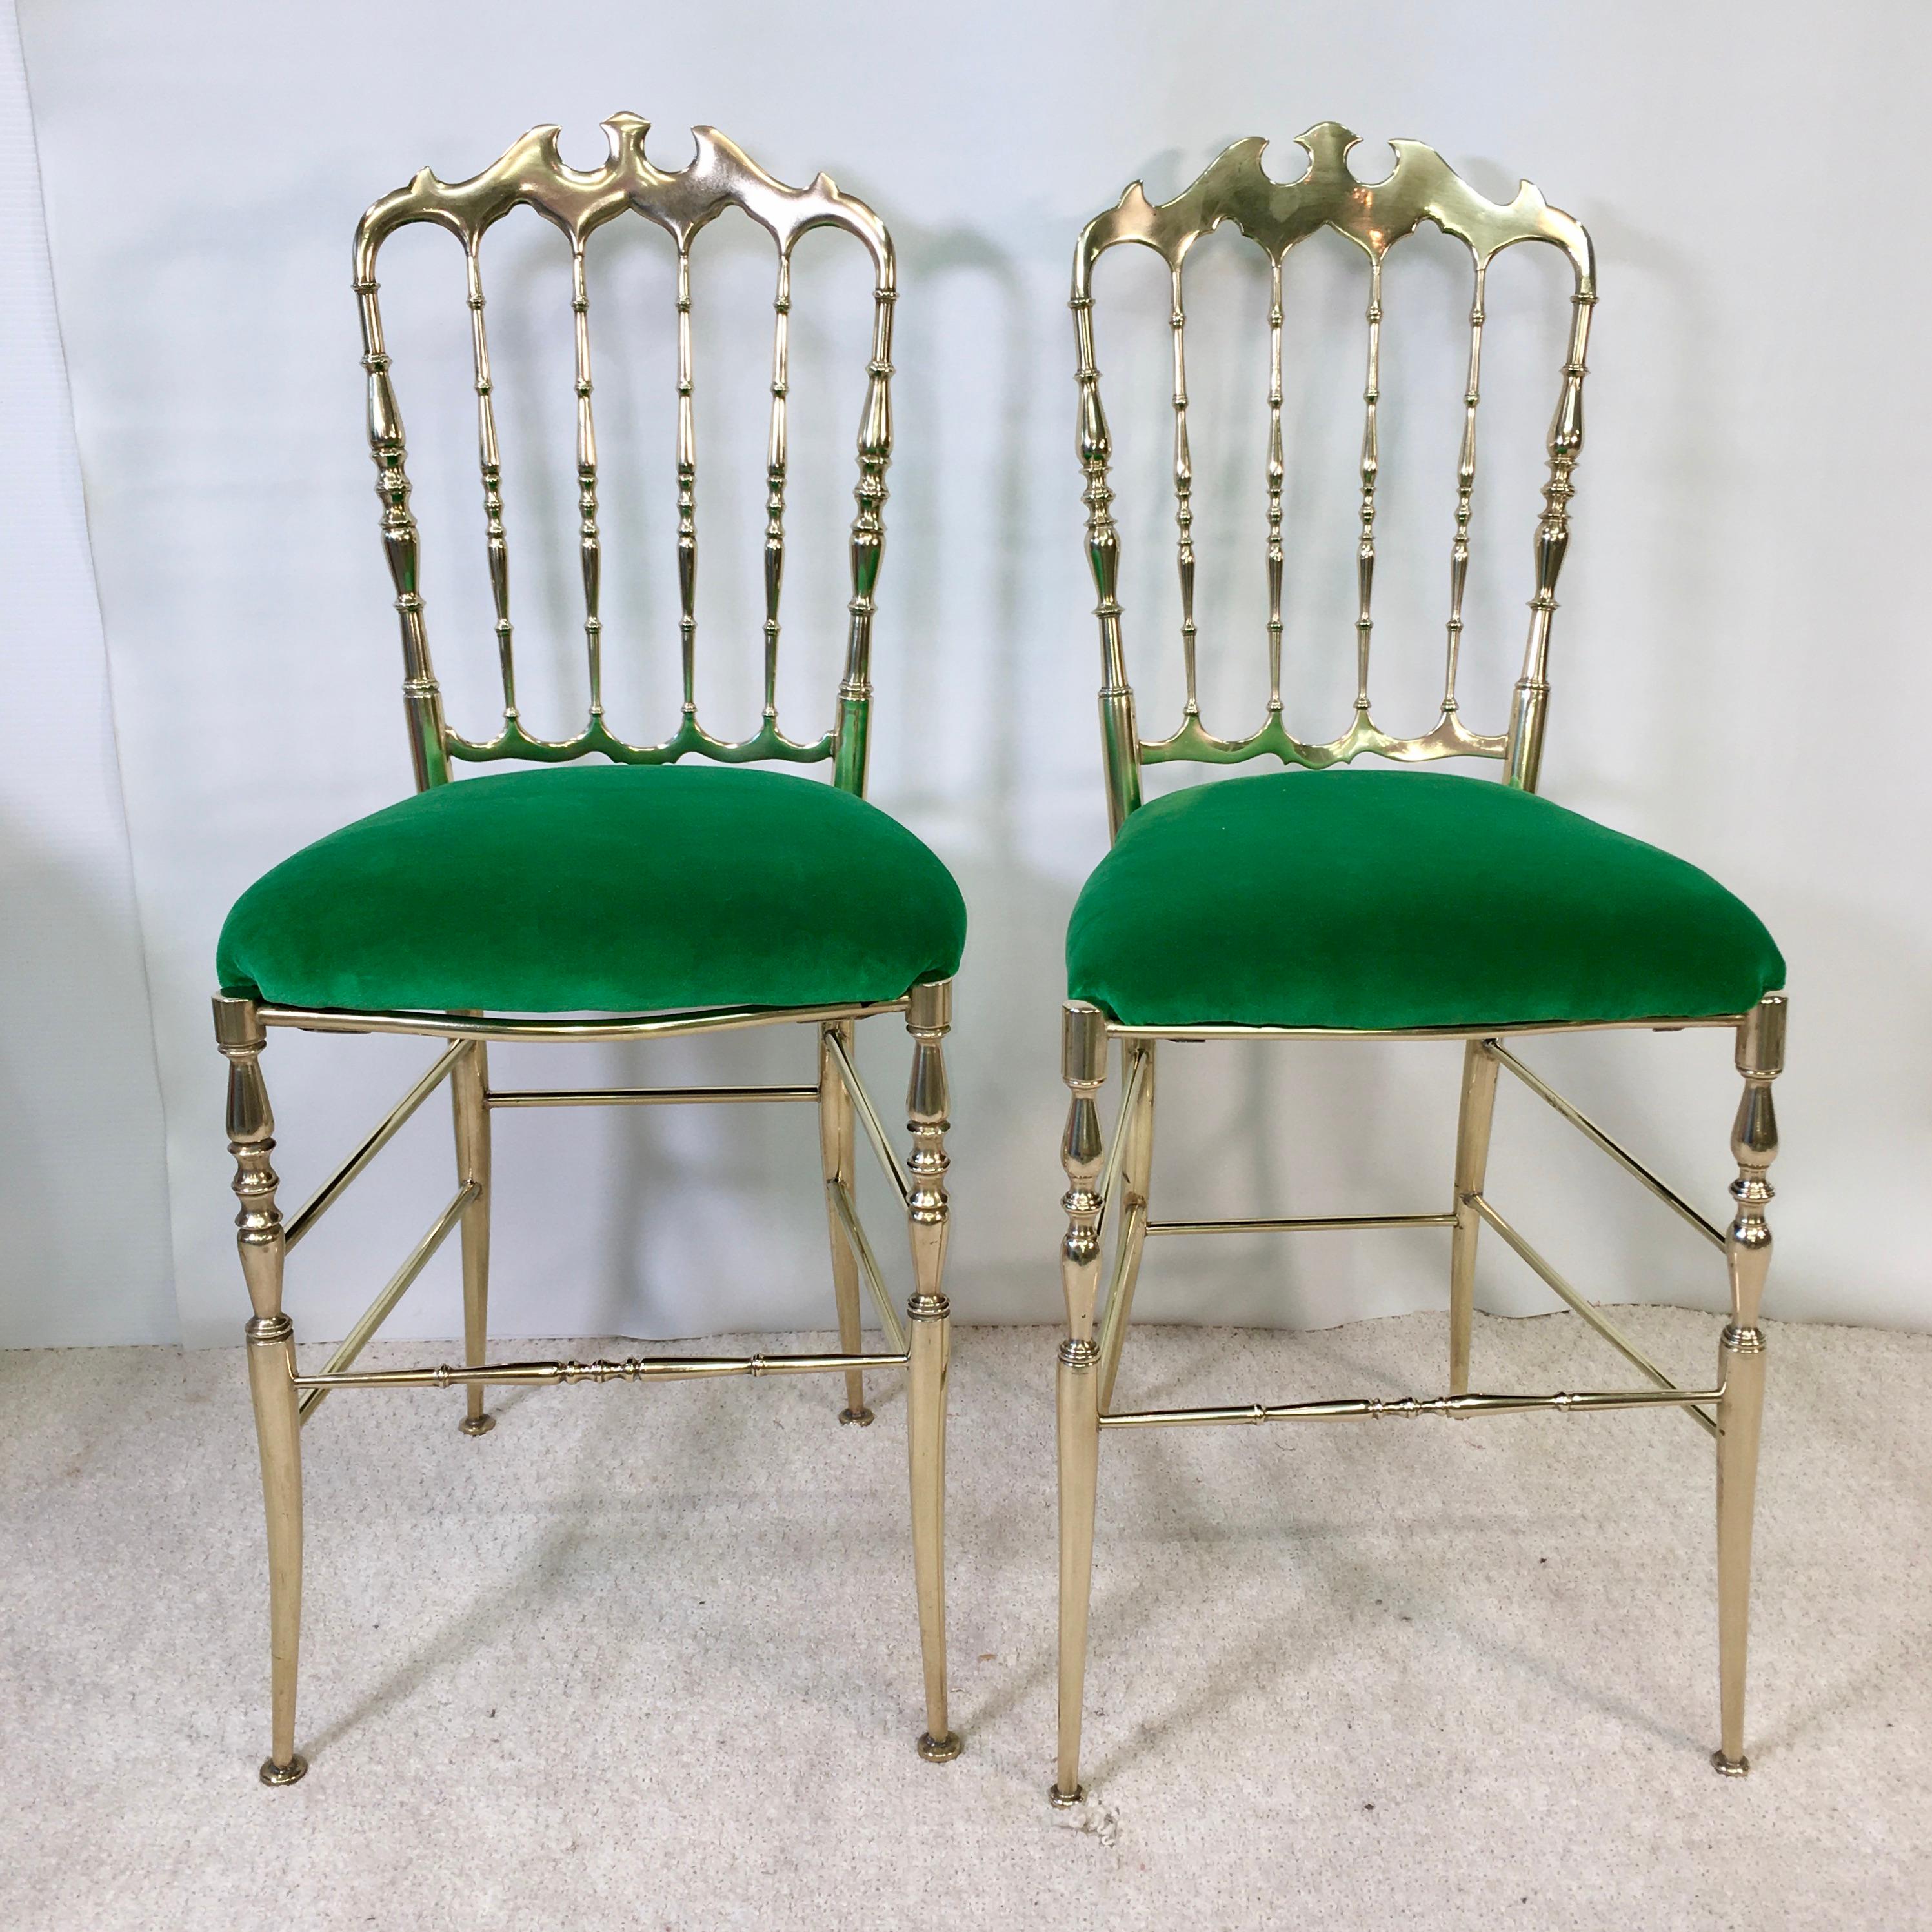 We have five matching solid brass Chiavari ballroom chairs, hand polished and with seats newly upholstered in emerald green velvet.
Price shown is per chair.

The famous 'Chiavarina' was created in 1807 by the finest Ligurian ebanist of his day,